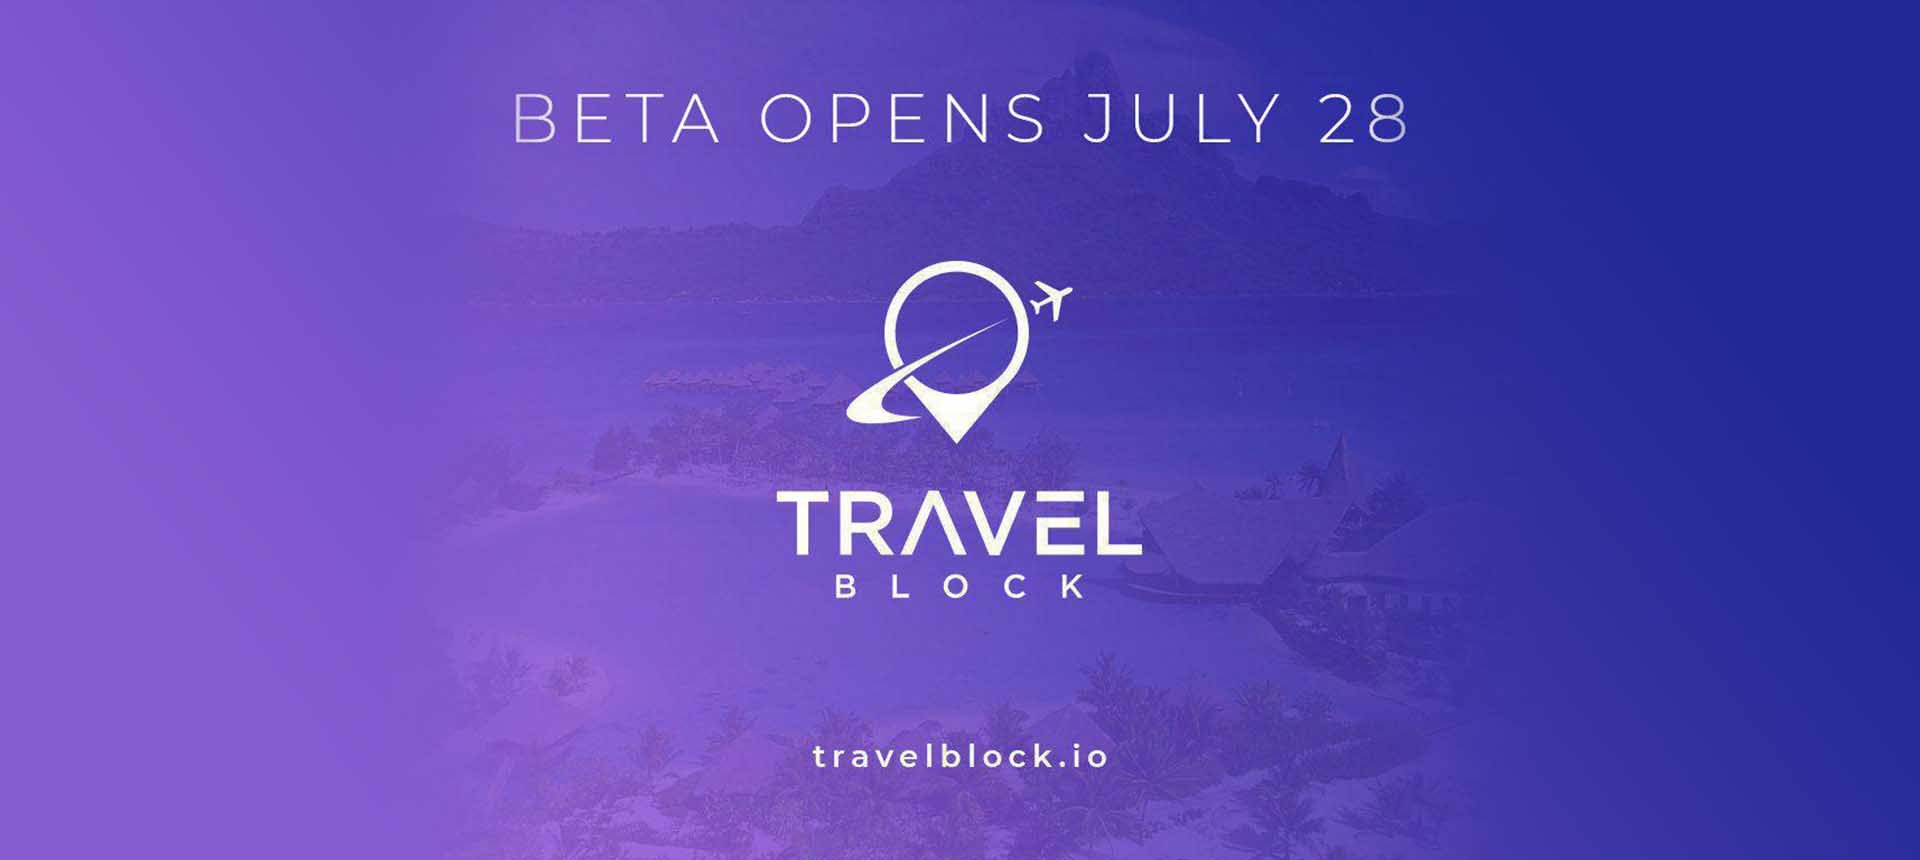 Vacationing Through the Blockchain Starts on 28th July as TravelBlock BETA Launches with Free Trips